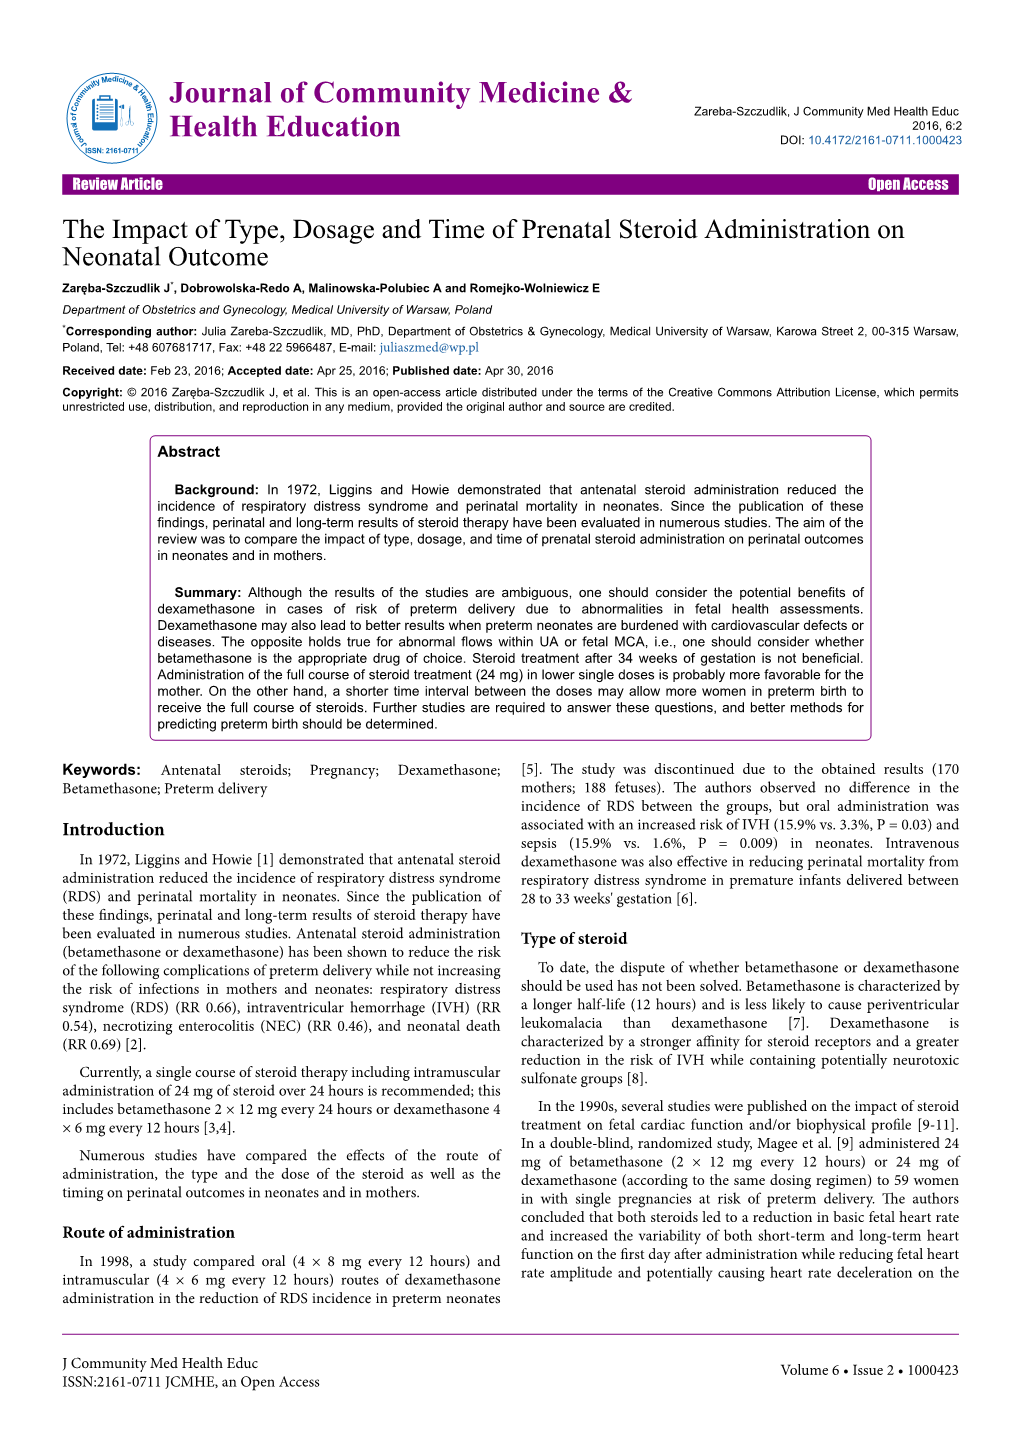 The Impact of Type, Dosage and Time of Prenatal Steroid